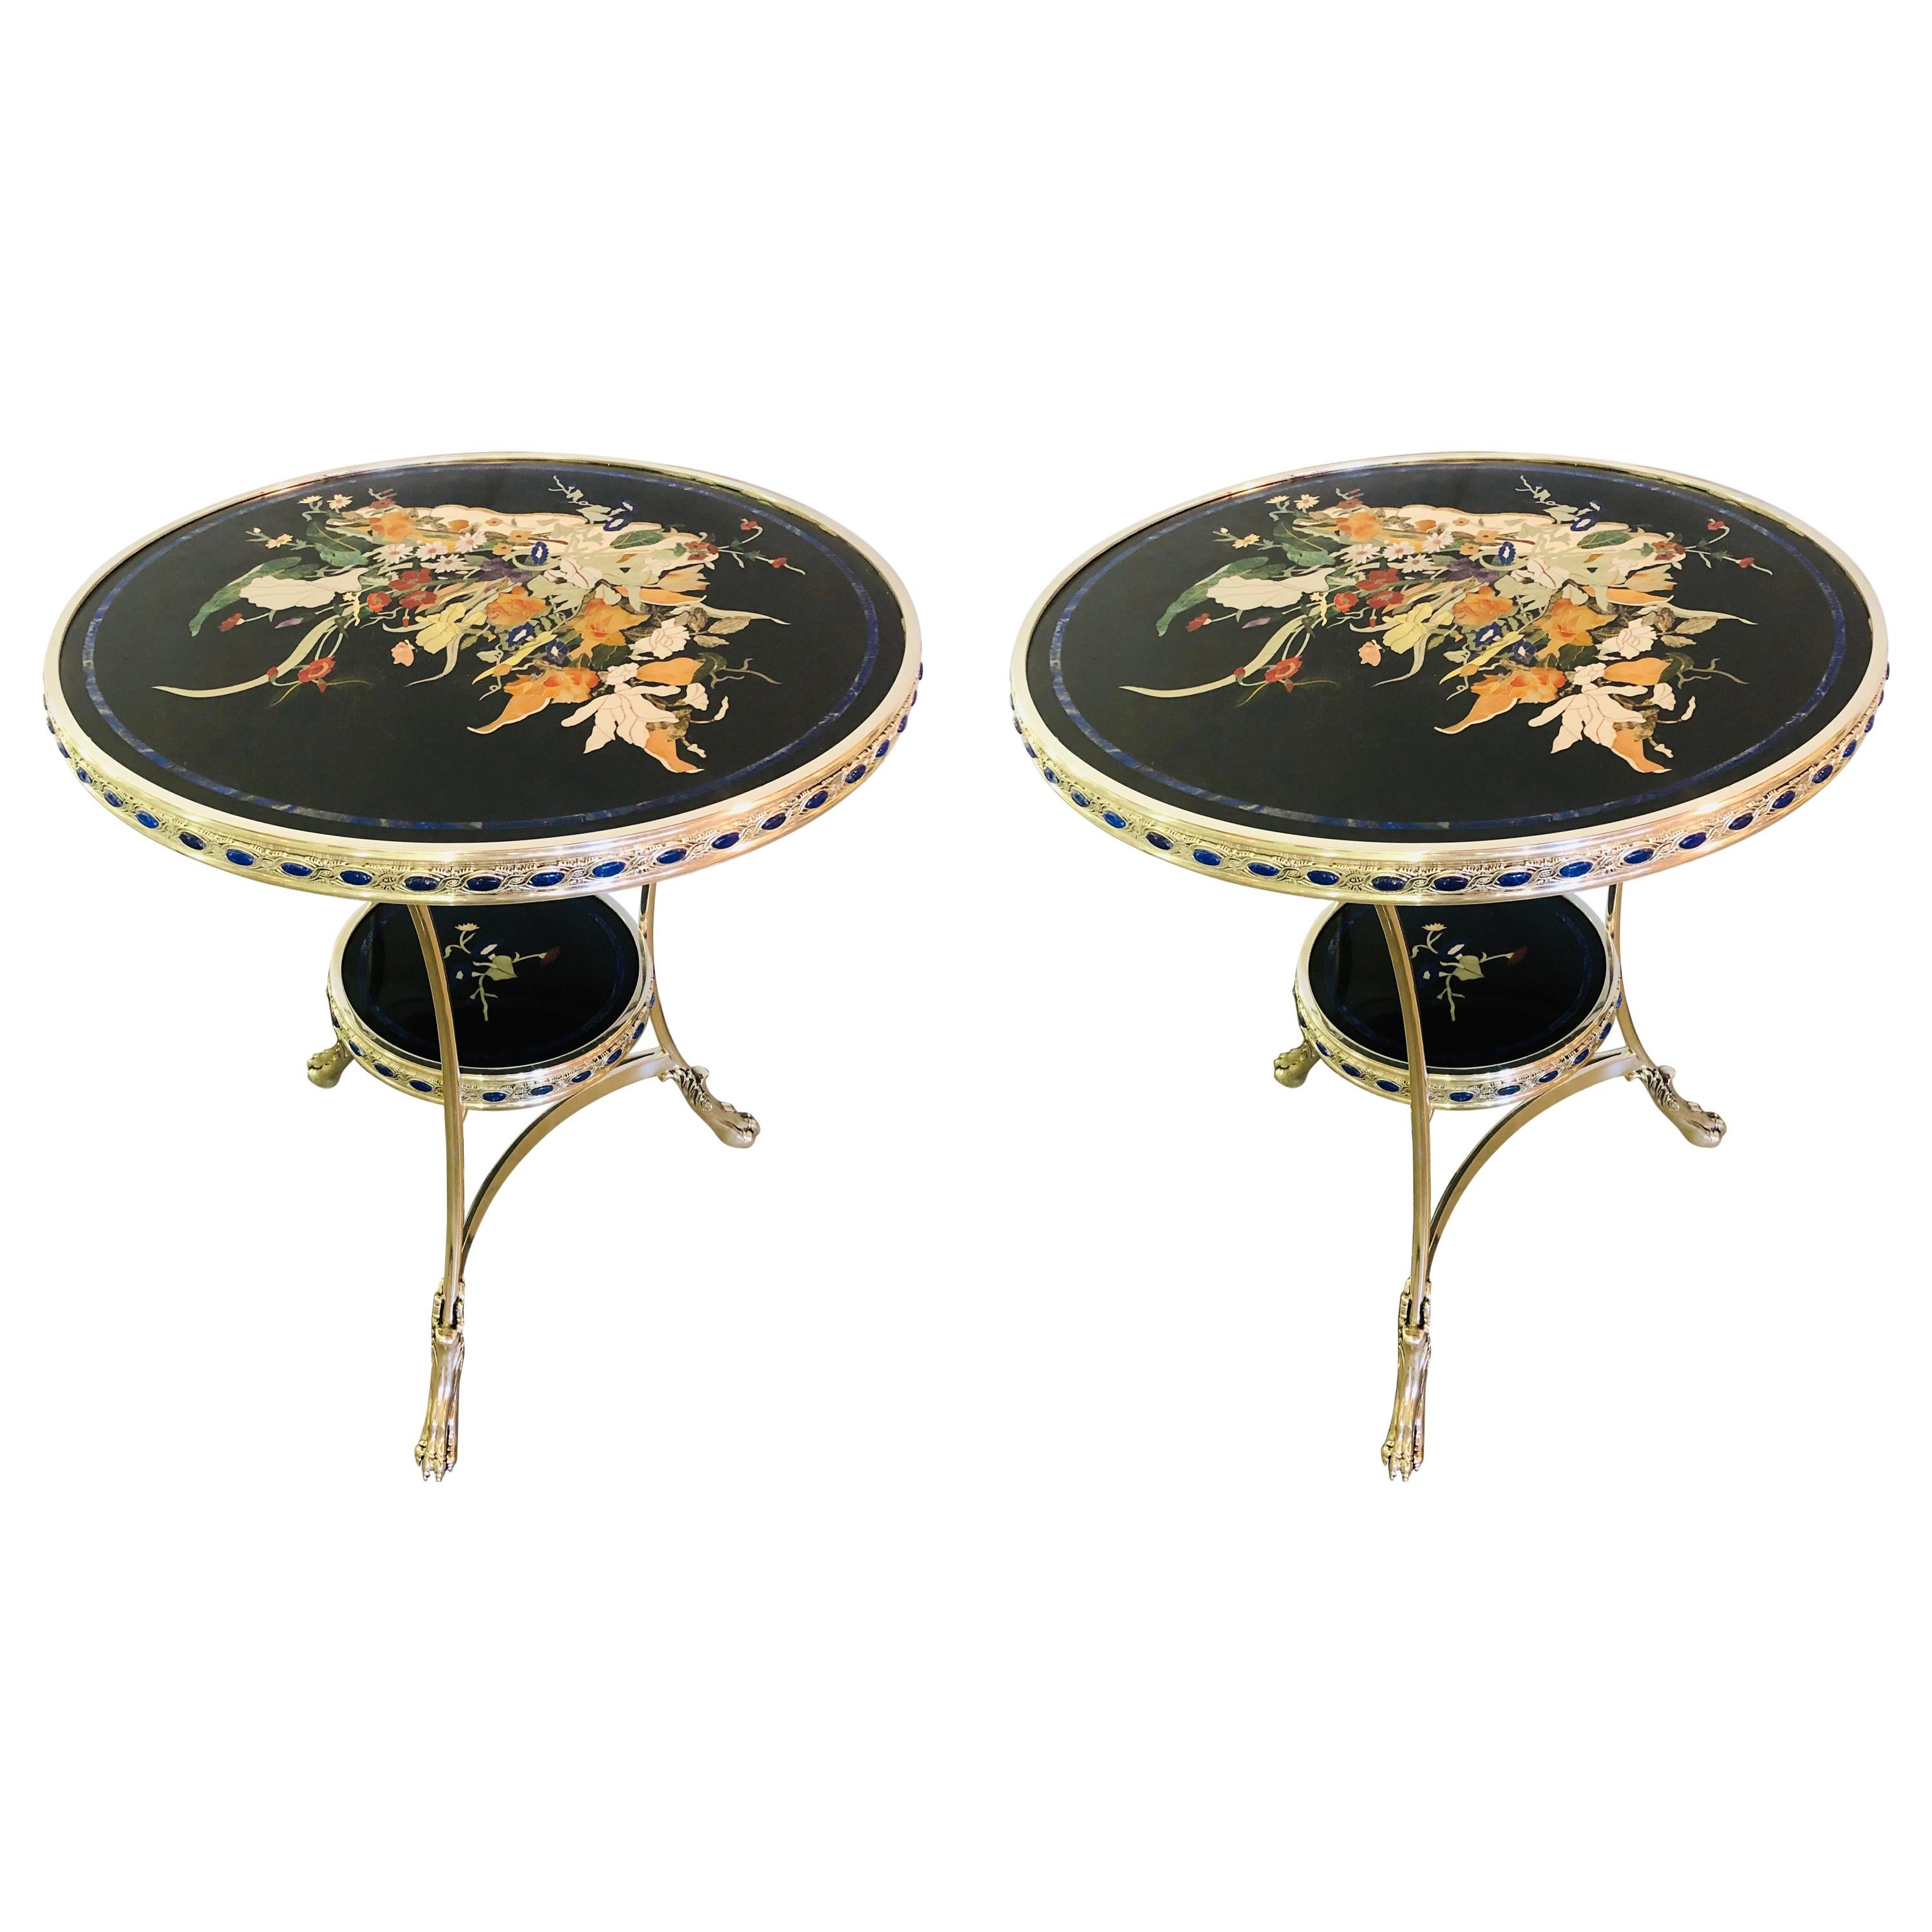 Pietra Dura Marble-Top Silver Metal Based End, Bouilliotte, Gueridon Table Pair